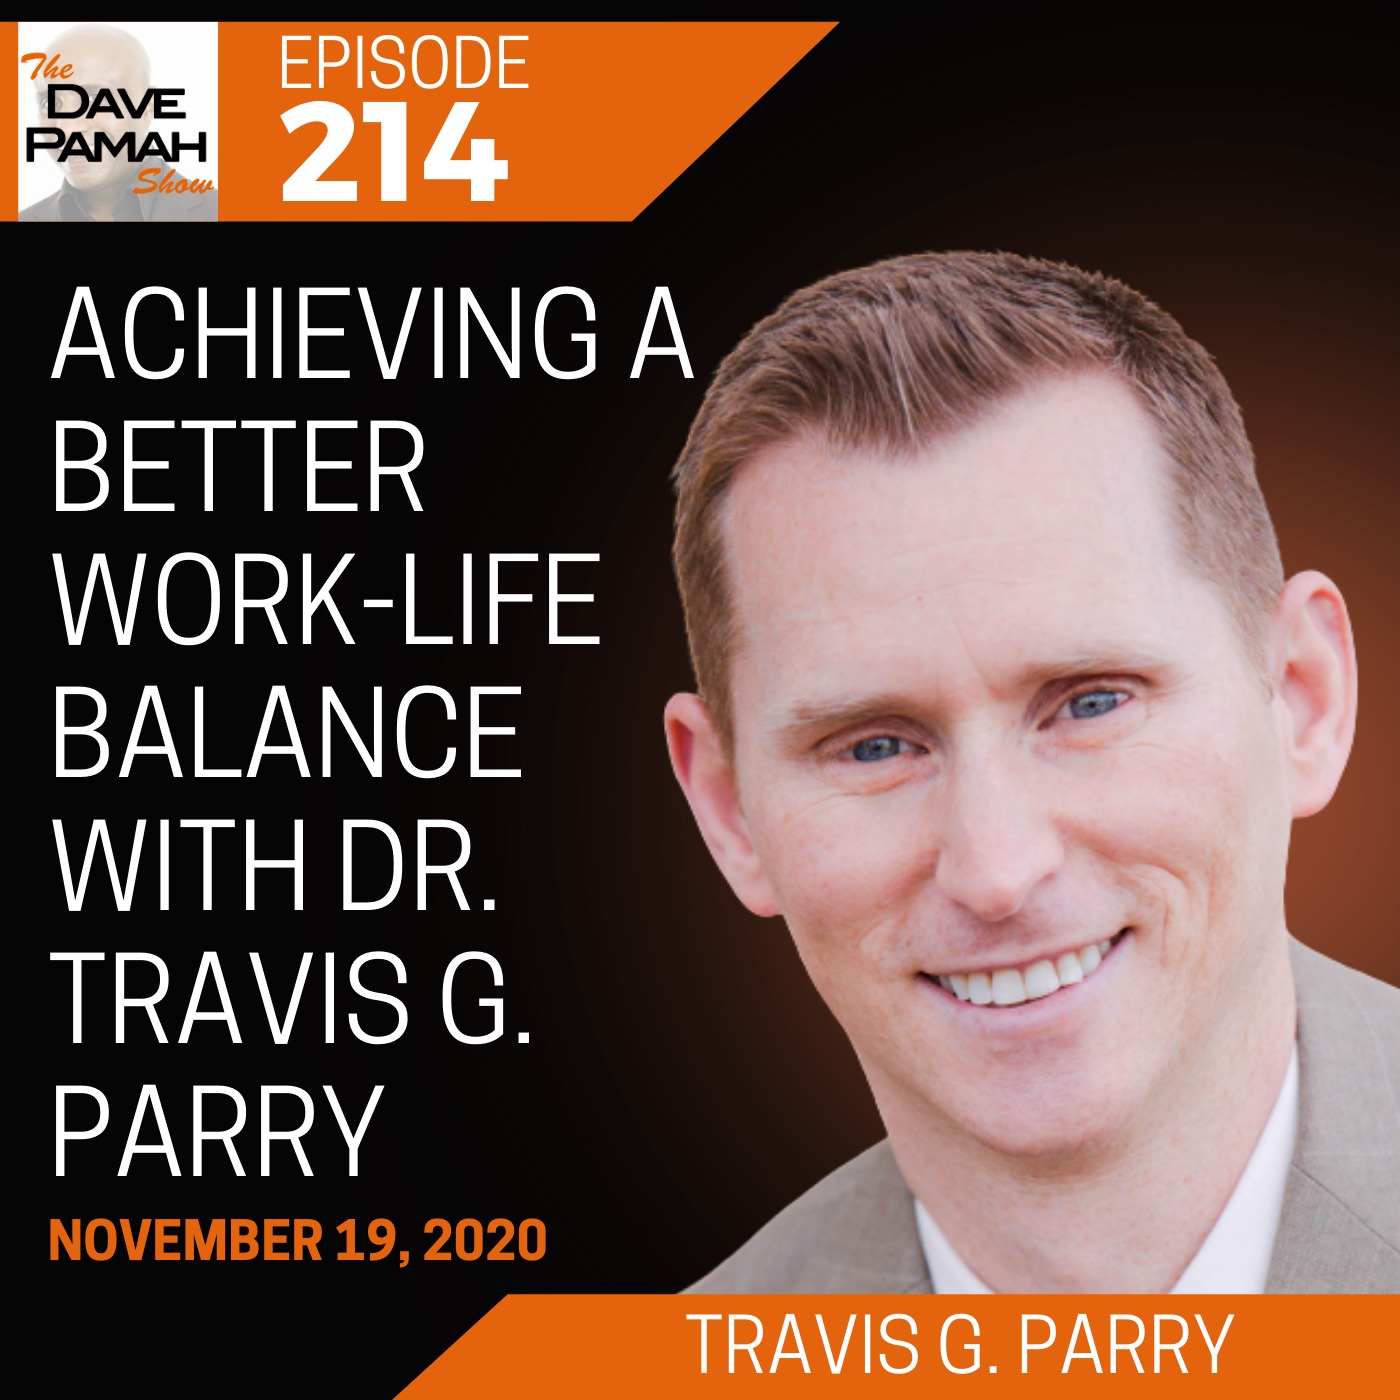 Achieving a better work-life balance with Dr. Travis G. Parry Image